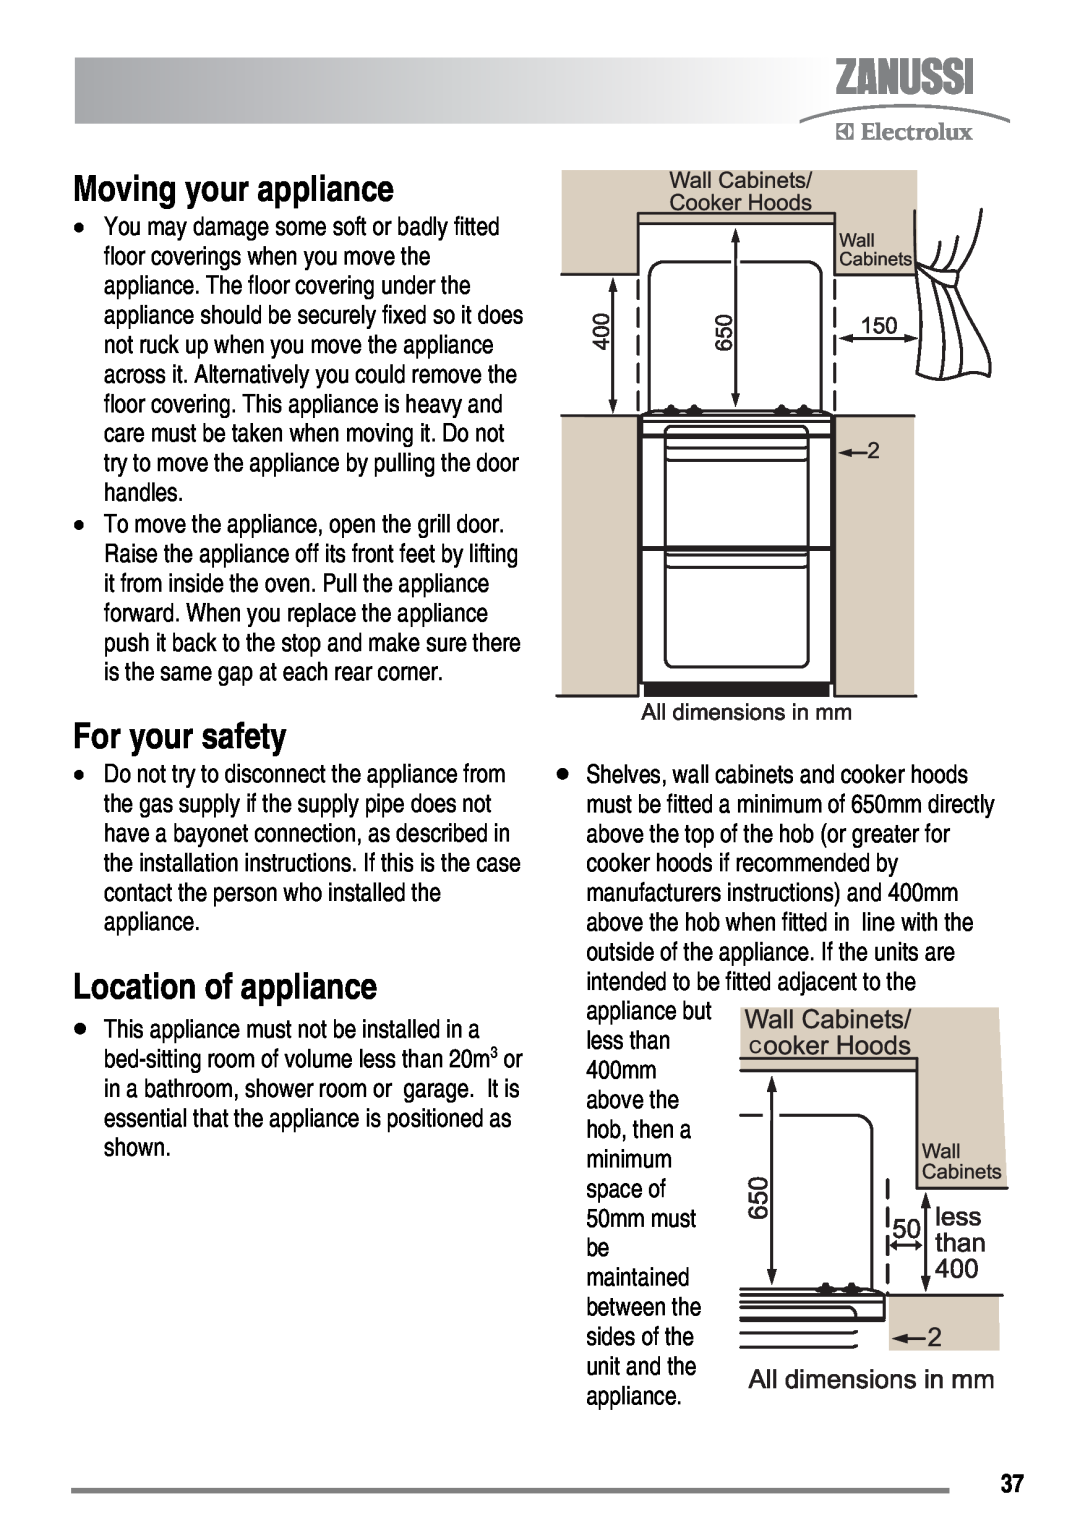 Zanussi ZKM6040 user manual Moving your appliance, For your safety, Location of appliance, above the 